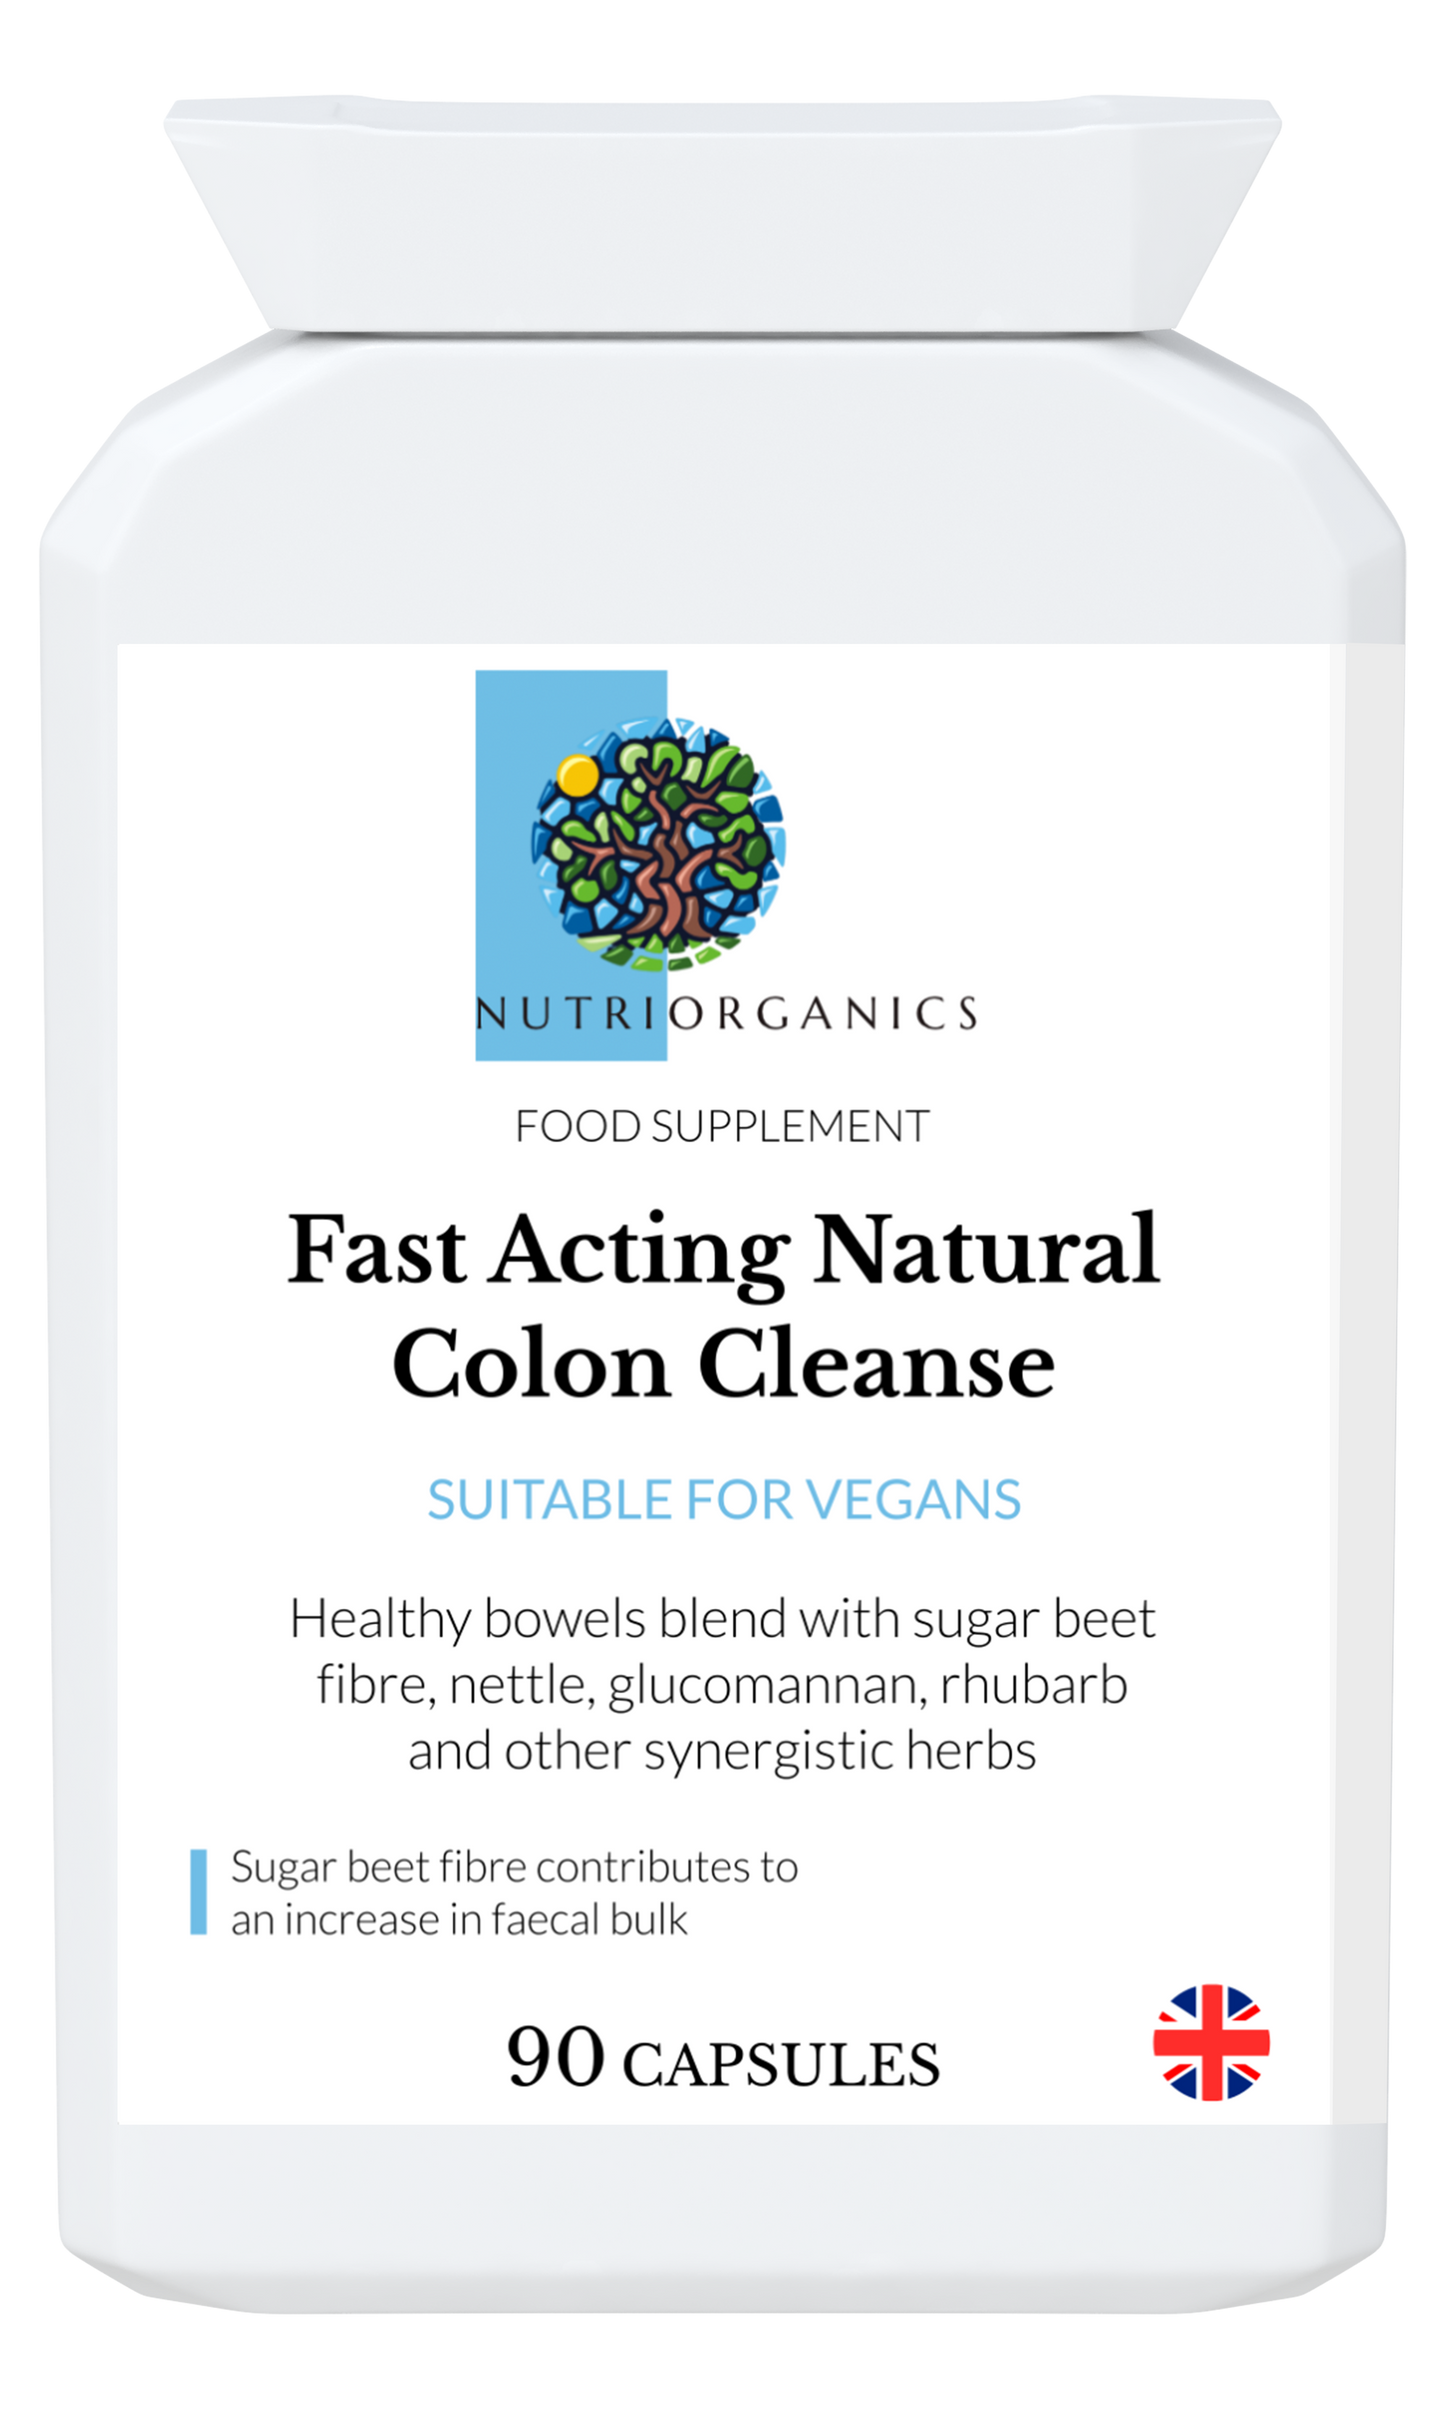 Fast Acting Natural Colon Cleanse